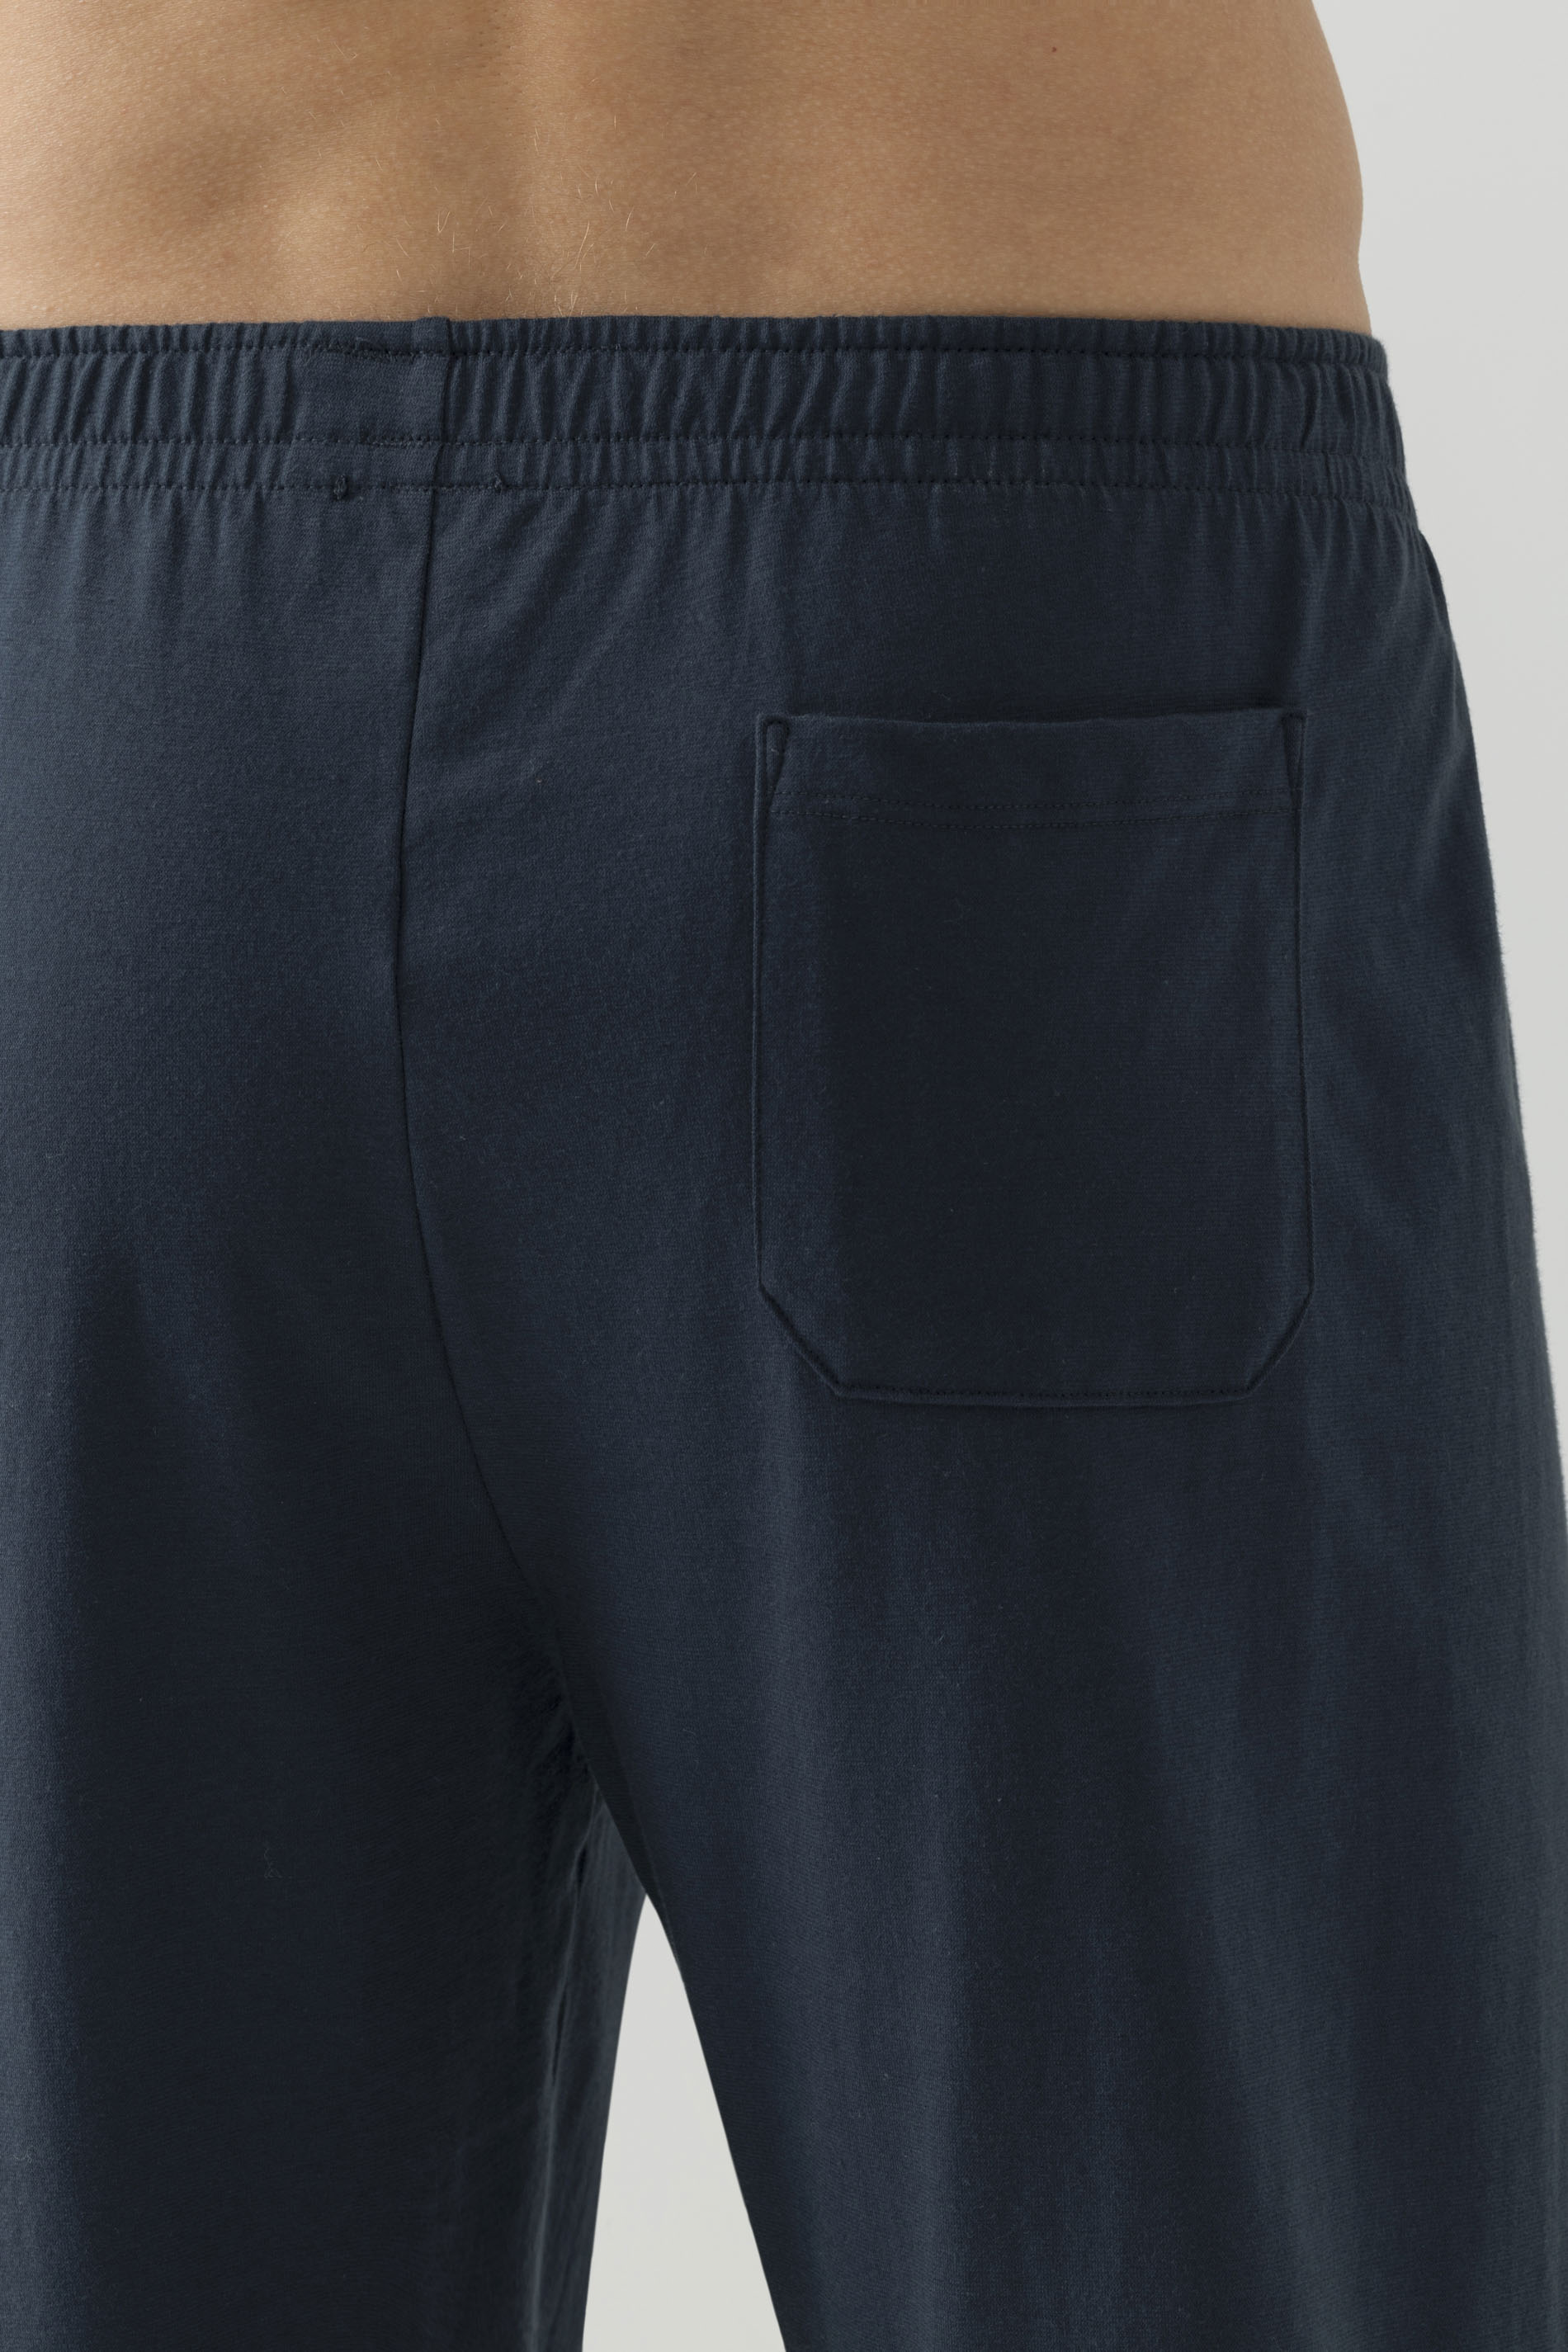 Long bottoms Serie Ringwood Detail View 01 | mey®